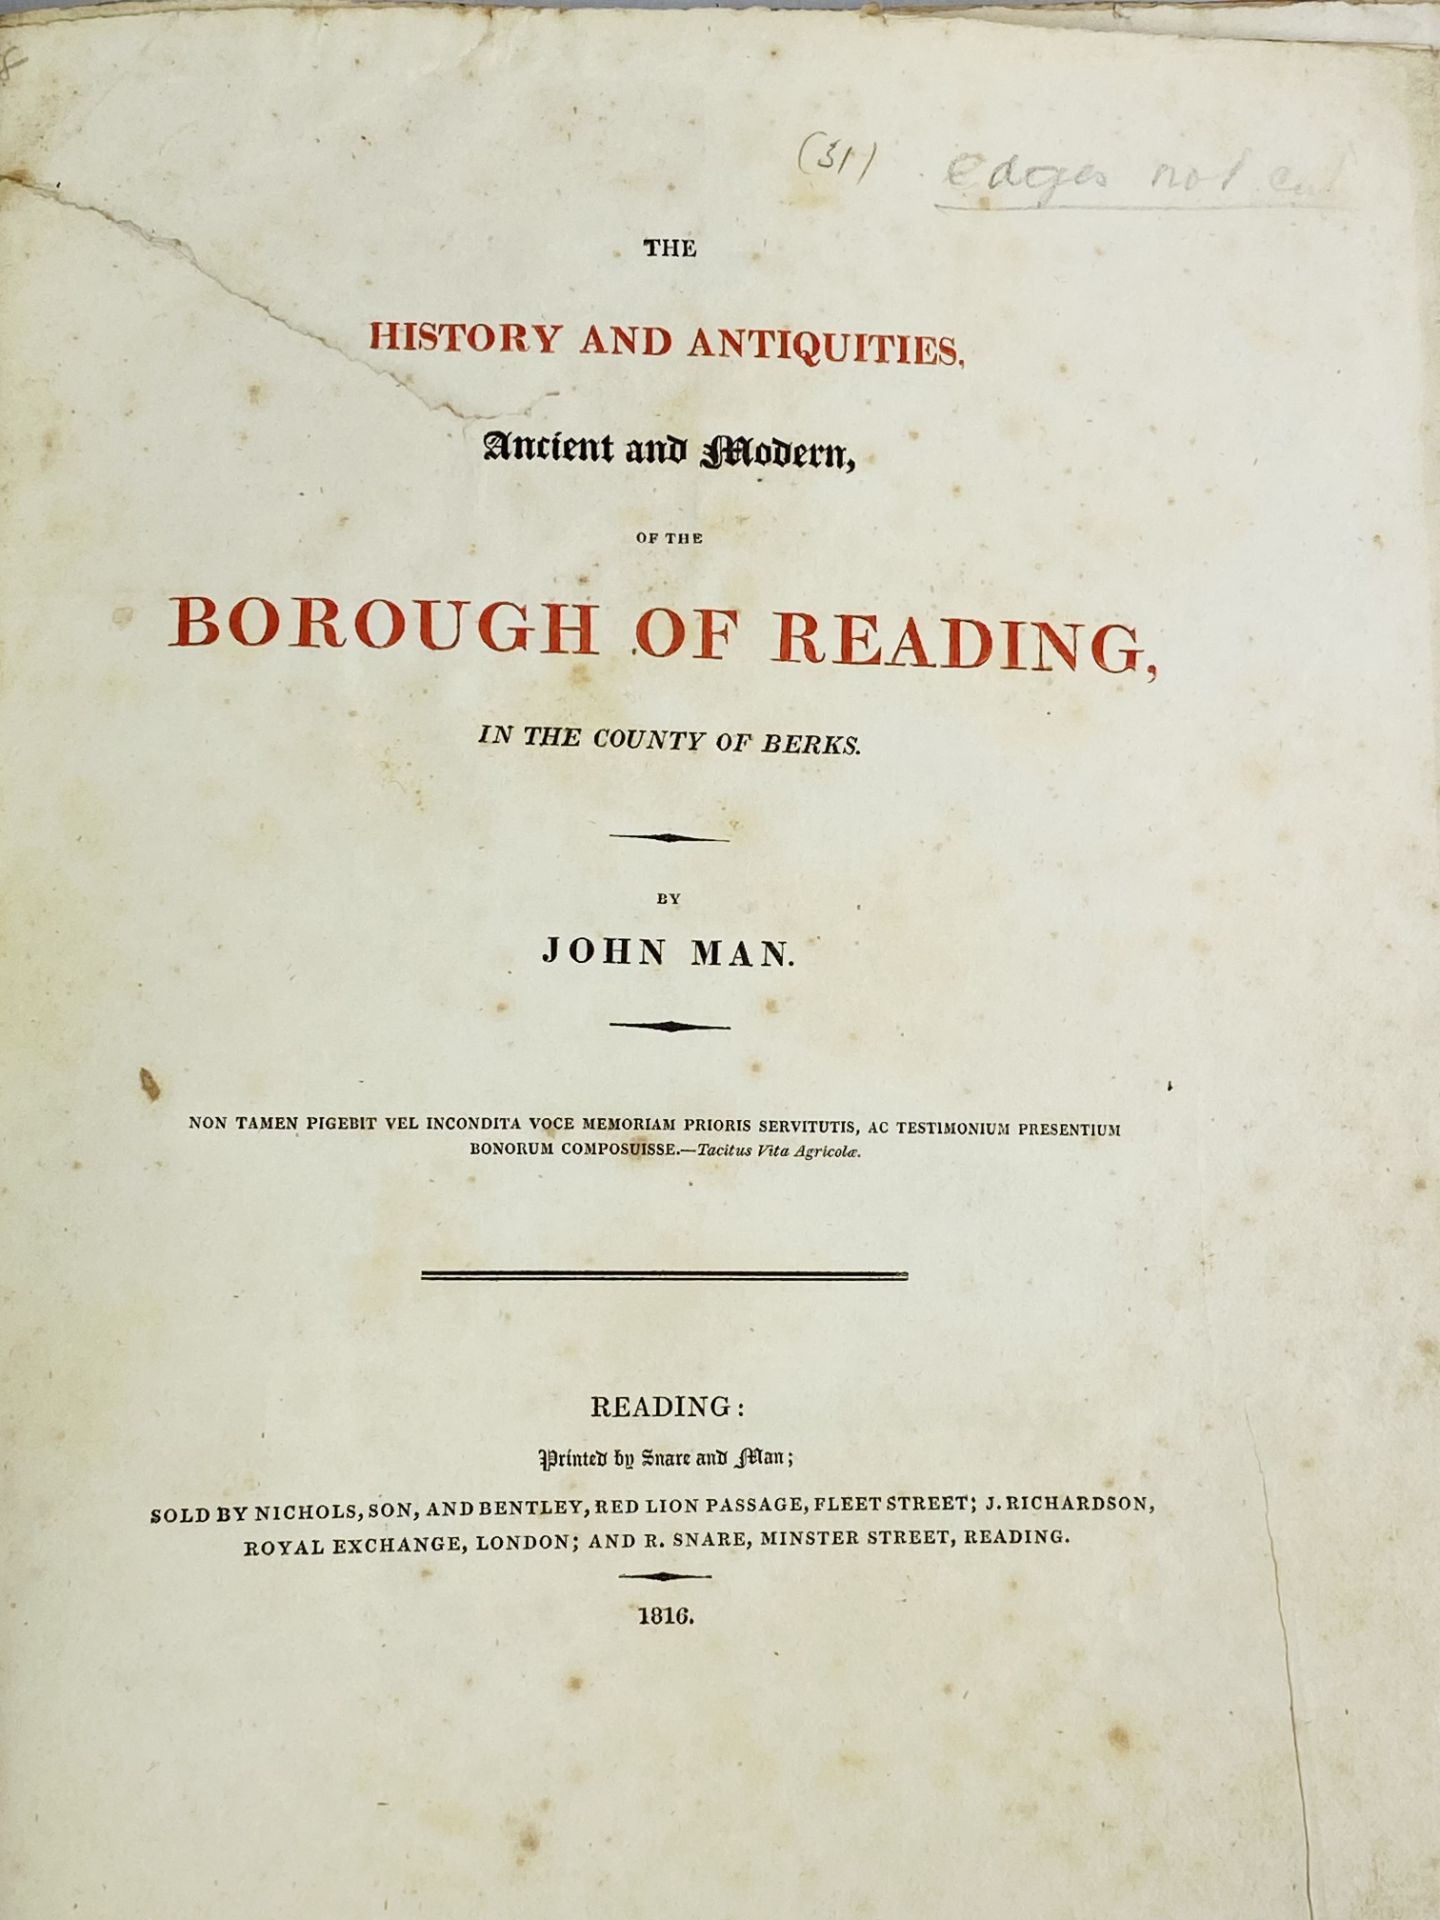 The History and Antiquities of the Borough of Reading by John Man, 1816 - Bild 2 aus 4